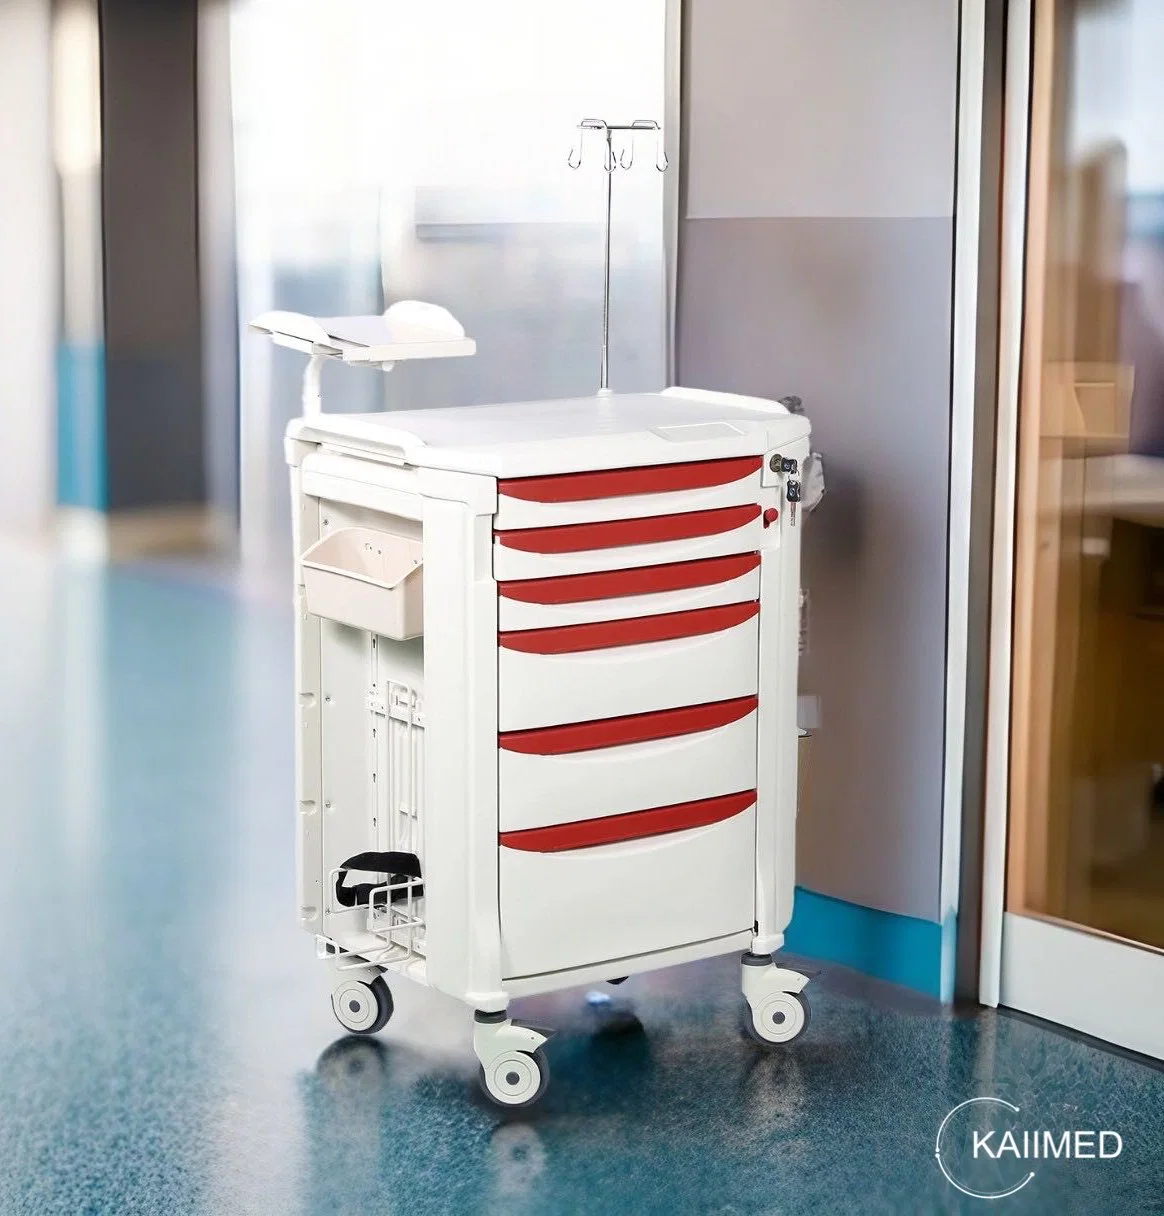 ABS Emergency Trolley and Cart with Drawers for Medical, Logistic, Linen, Laundry, Treatment, Anesthesia, Medicine Distribution as Hospital Furniture- F